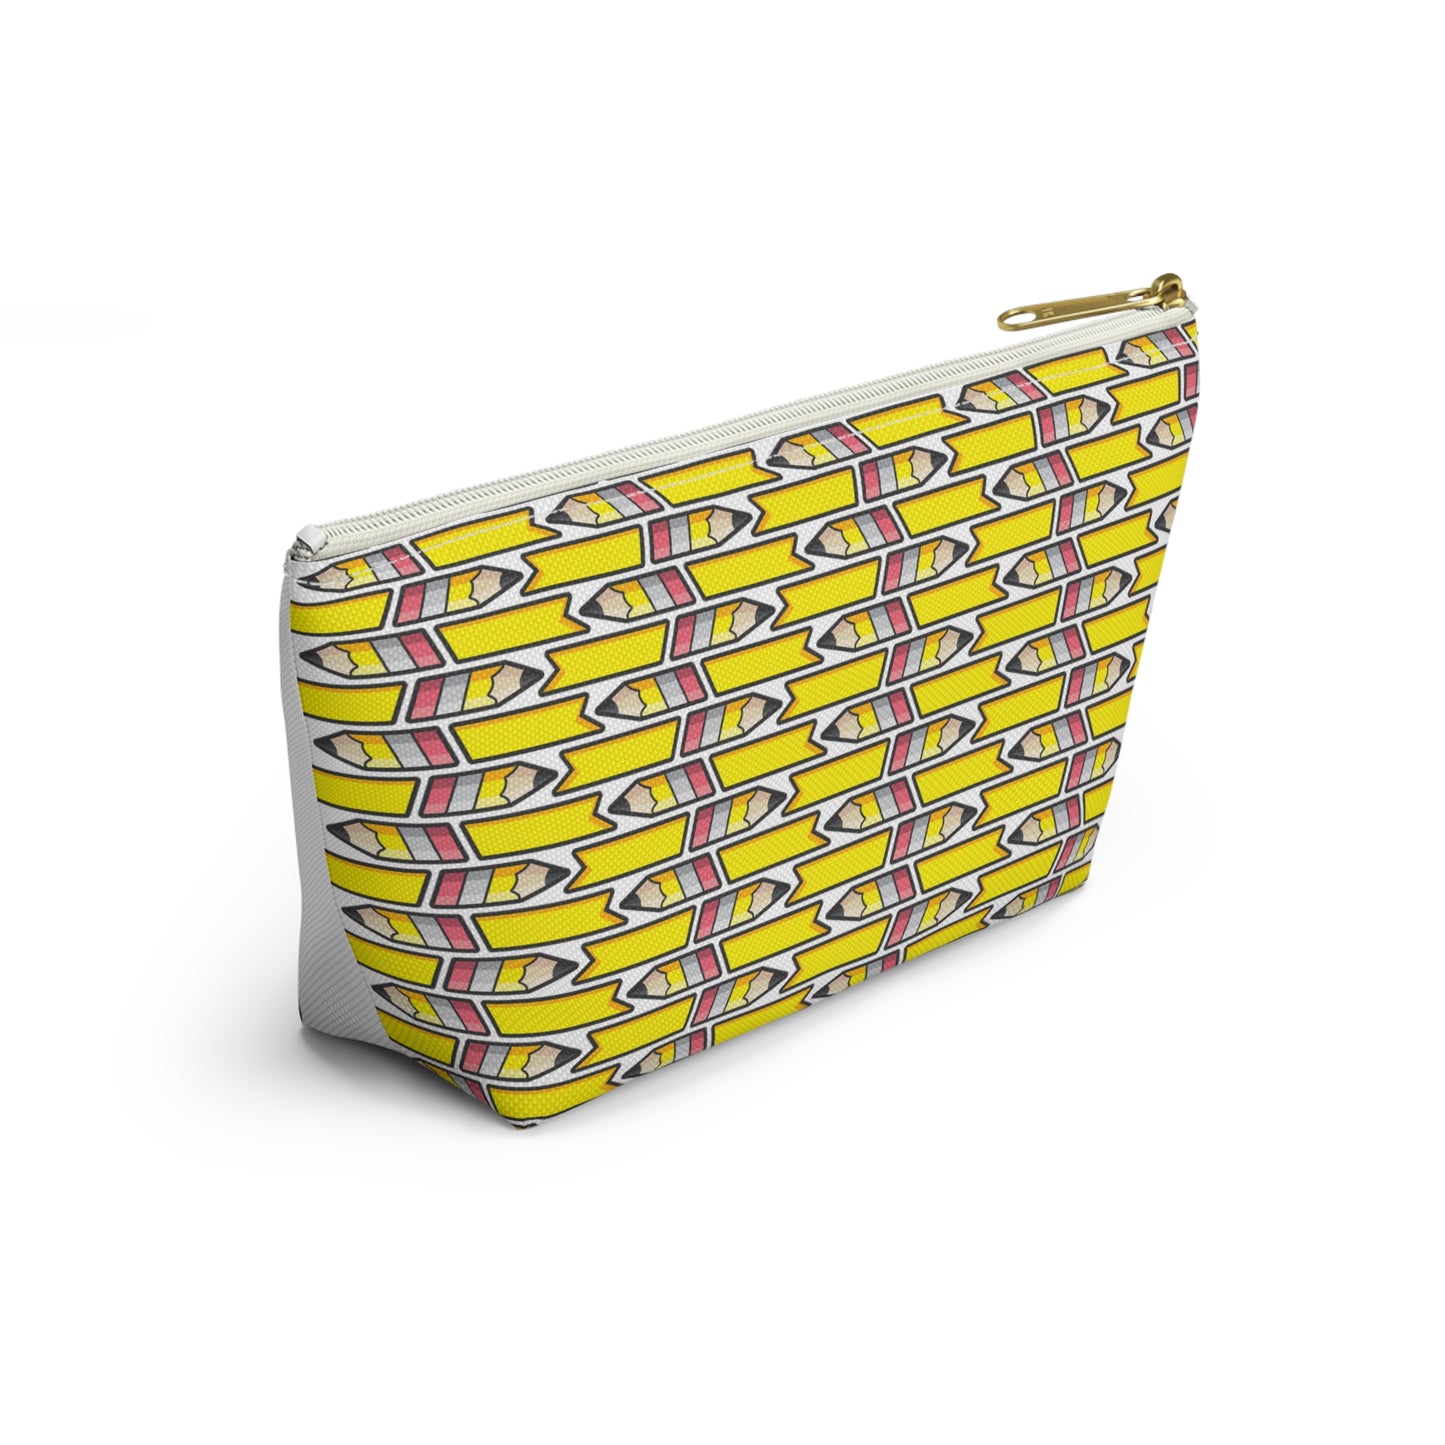 RAD Accessory Pouch with T-bottom